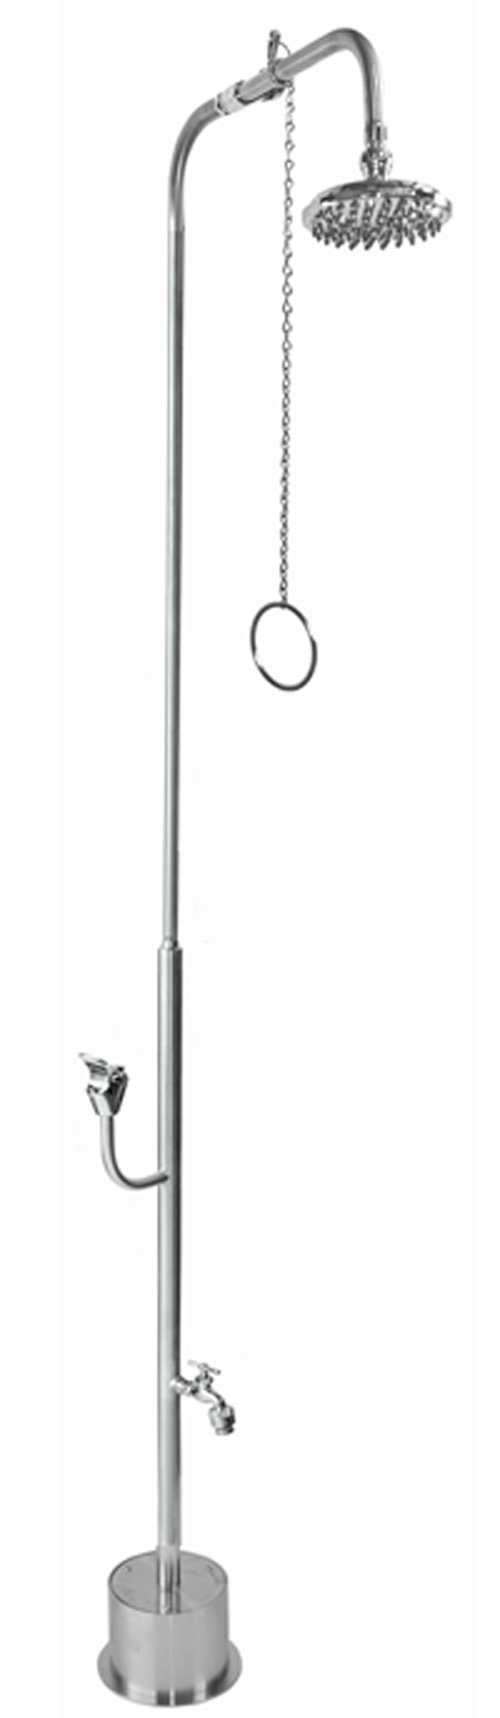 PM-600-PCV-CHV Wall Mount Single Supply Shower with Pull Chain Valve